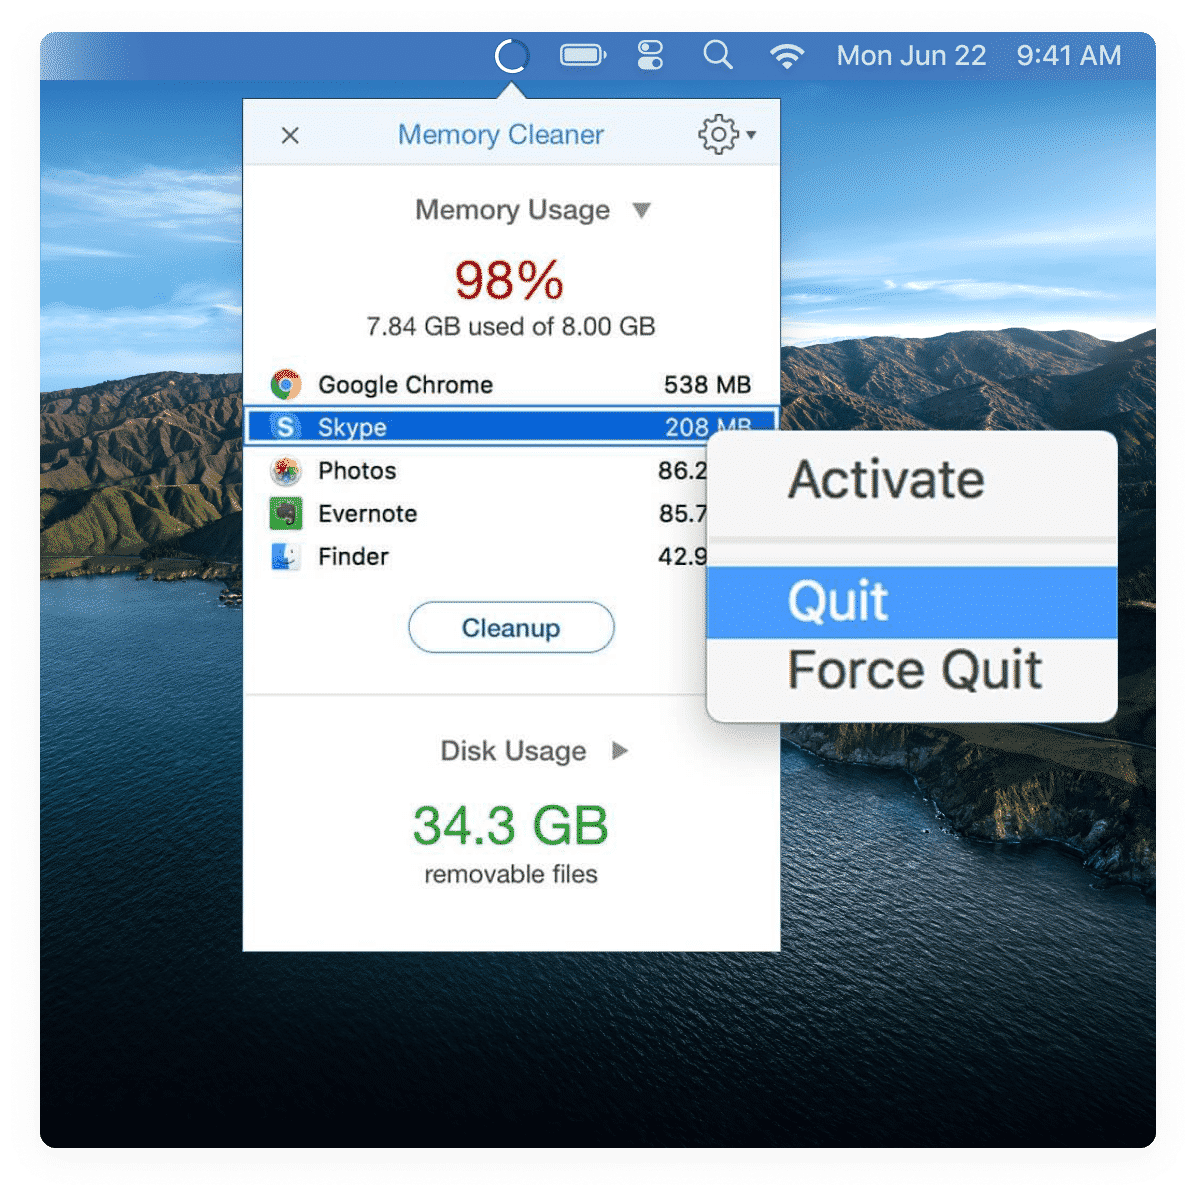 Memory Cleaner option to force quit apps